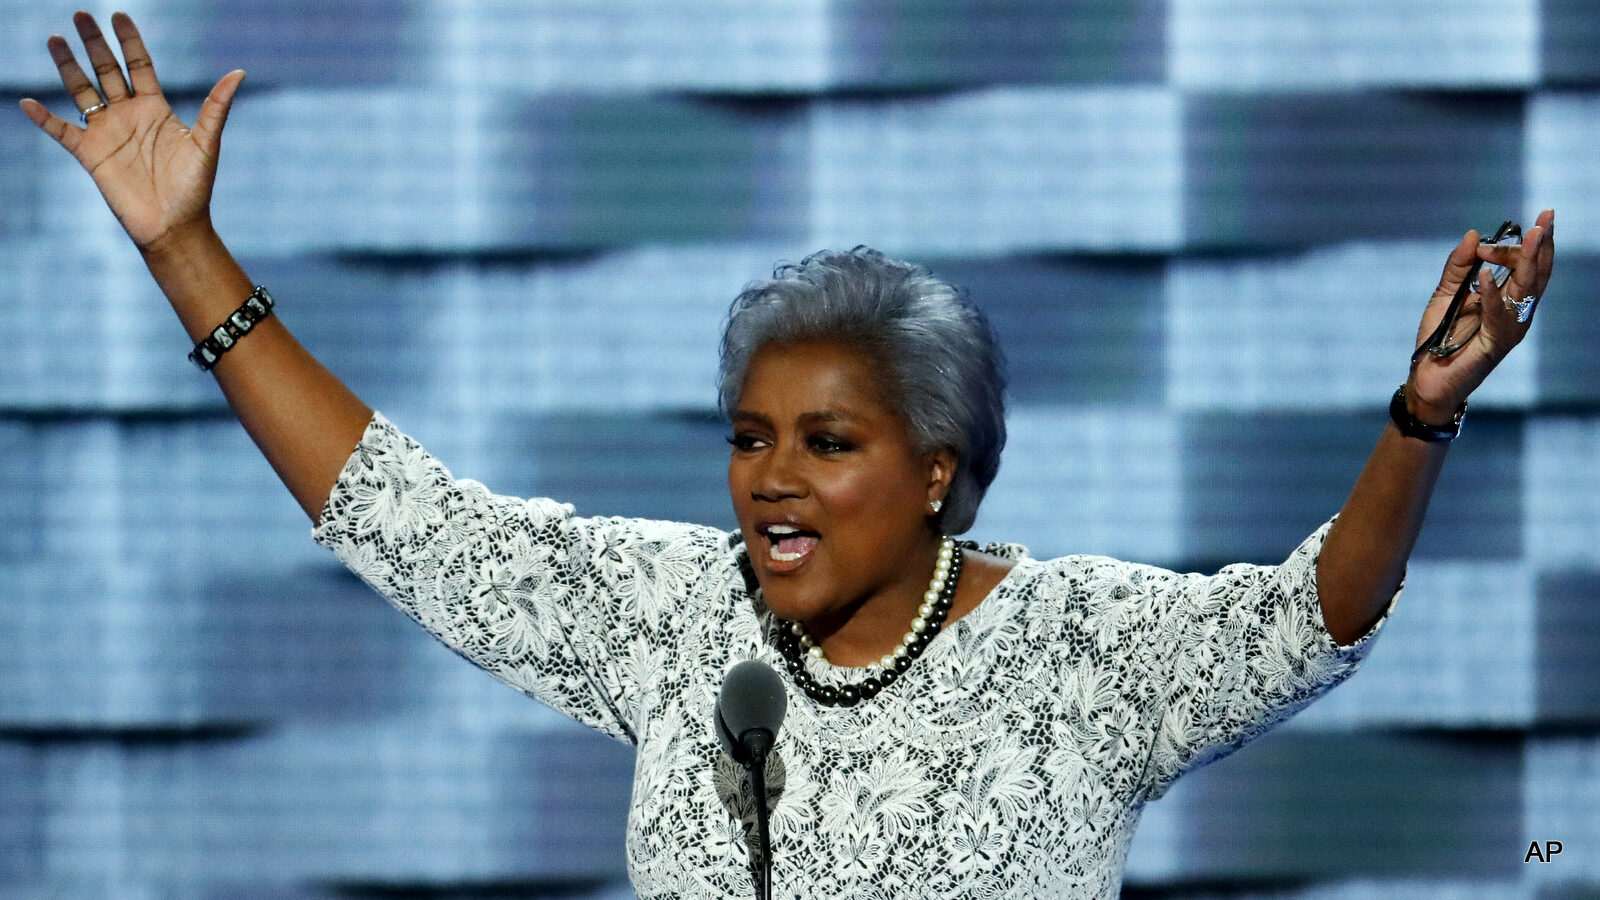 Democratic National Committee Chair Donna Brazile speaks during the second day of the Democratic National Convention in Philadelphia , Tuesday, July 26, 2016.